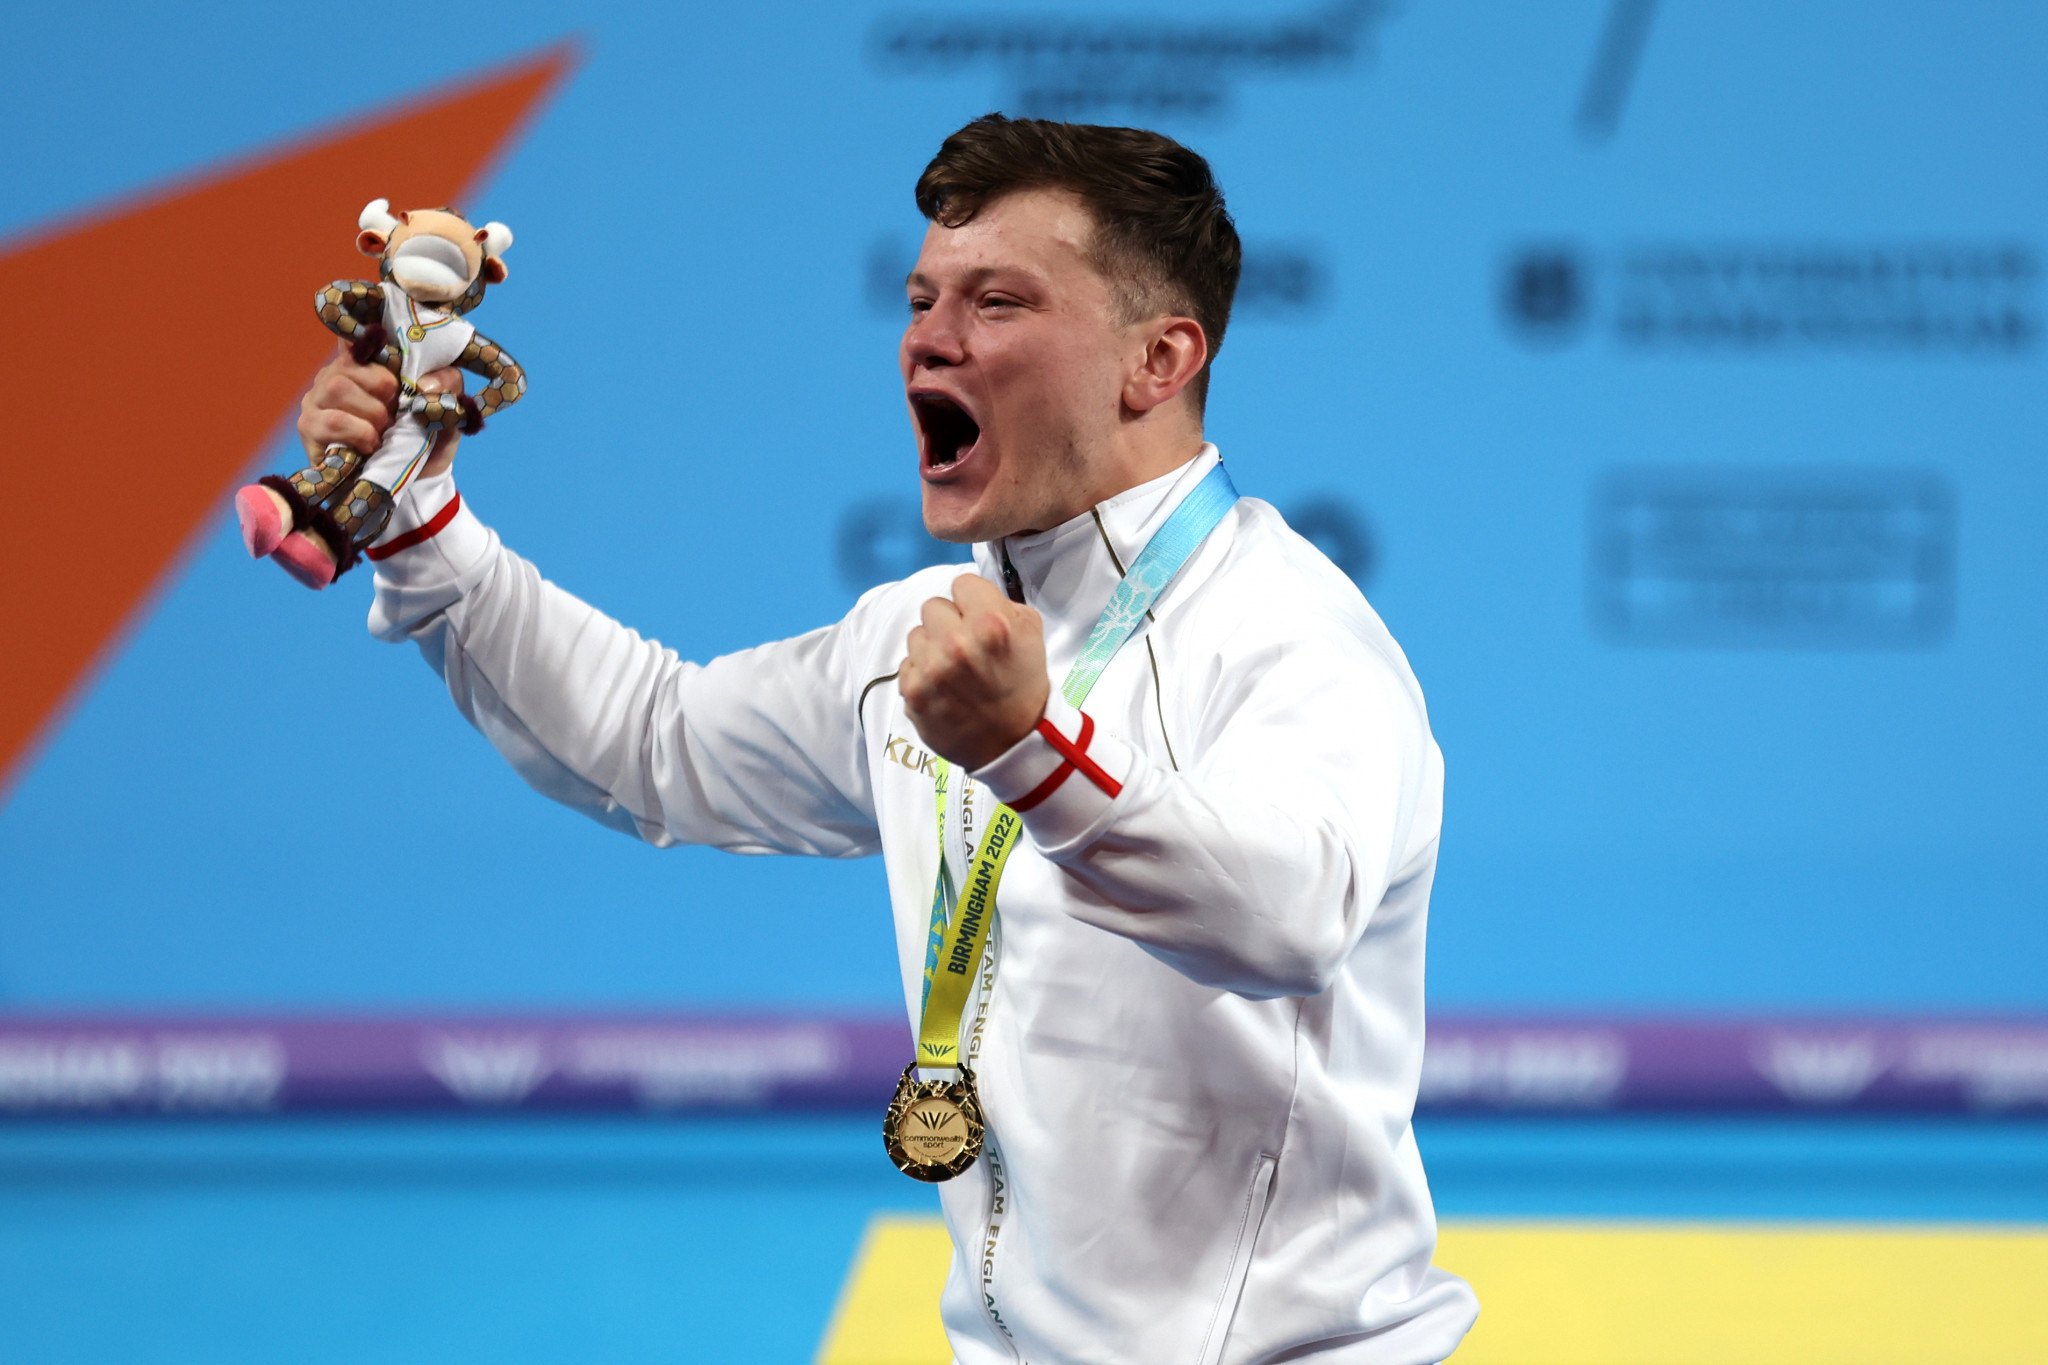 England's Chris Murray held on to take gold in the men's 81kg division ©Getty Images